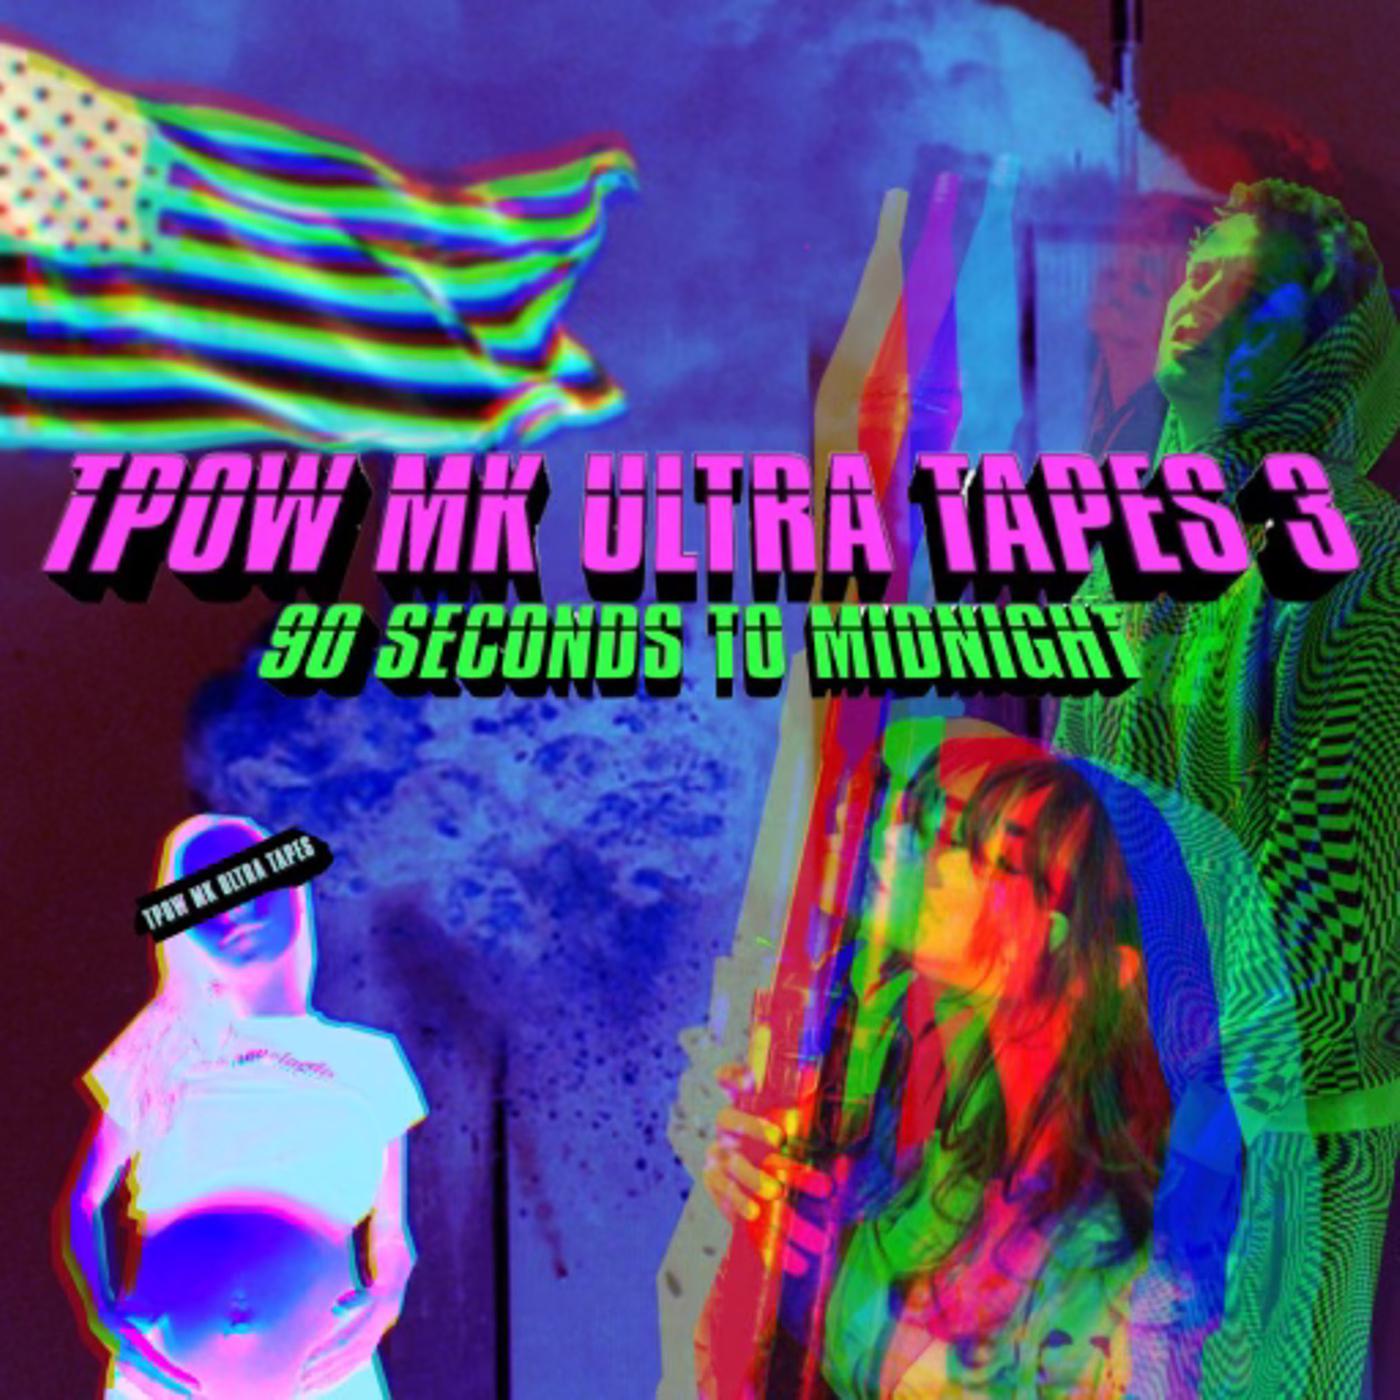 Постер альбома TPOW MK Ultra Tapes 3 90 Seconds to Midnight